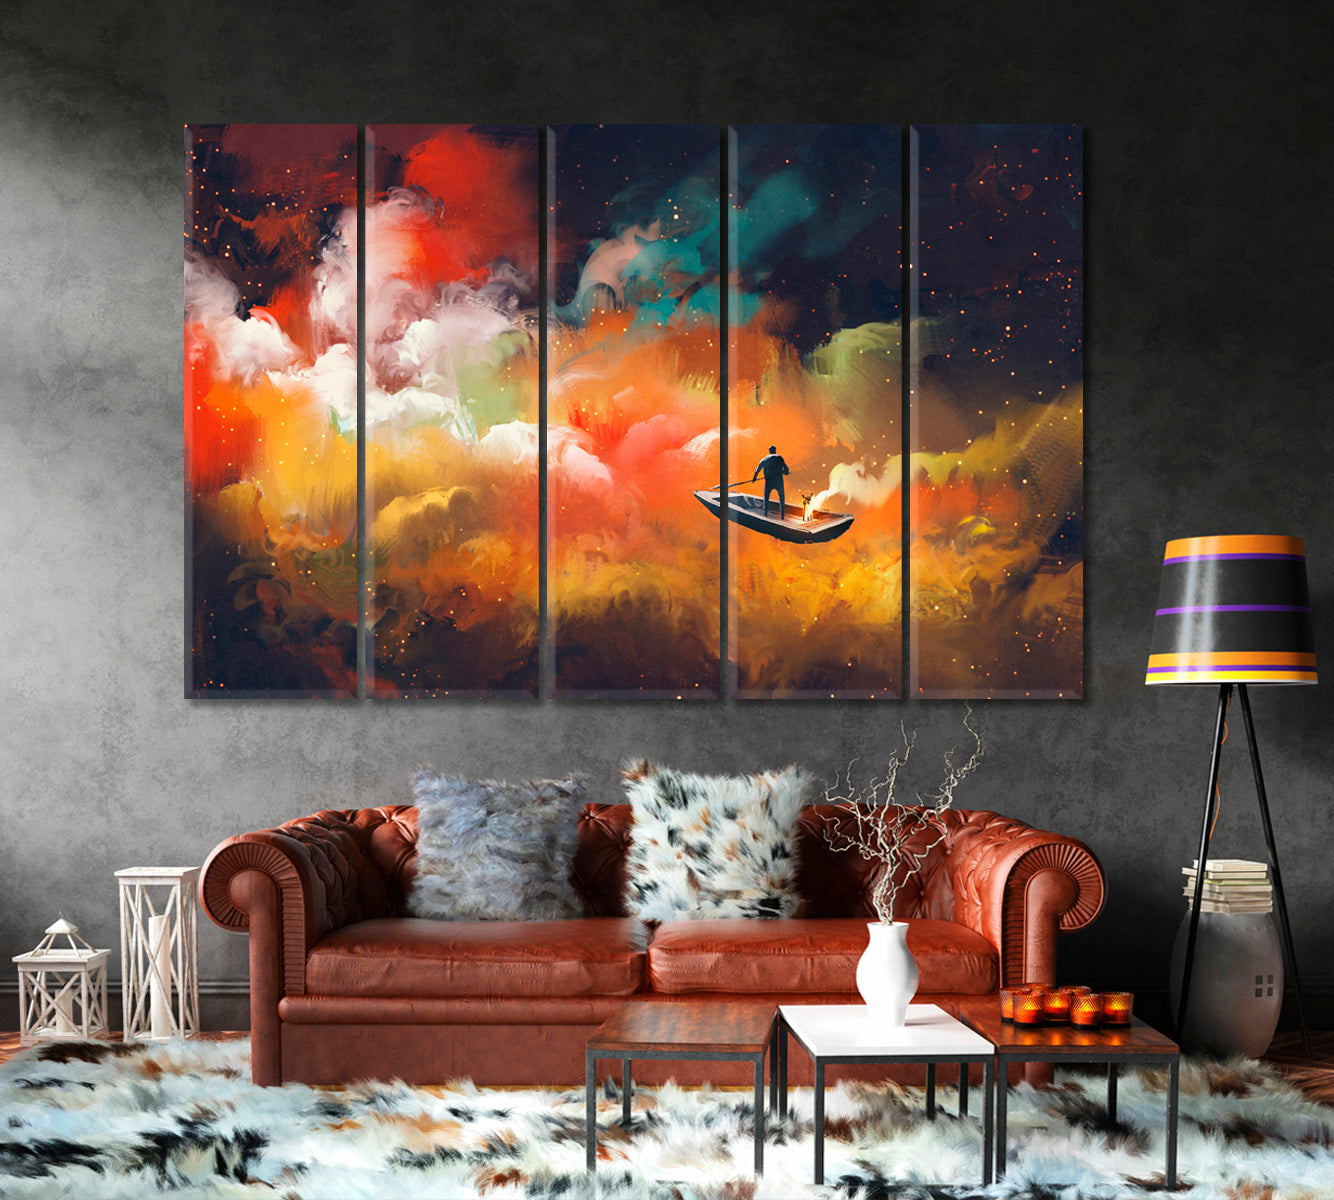 Surreal Dreamlike Man on Boat Outer Space Colorful Clouds Surreal Fantasy Large Art Print Décor Artesty 5 panels 36" x 24" 